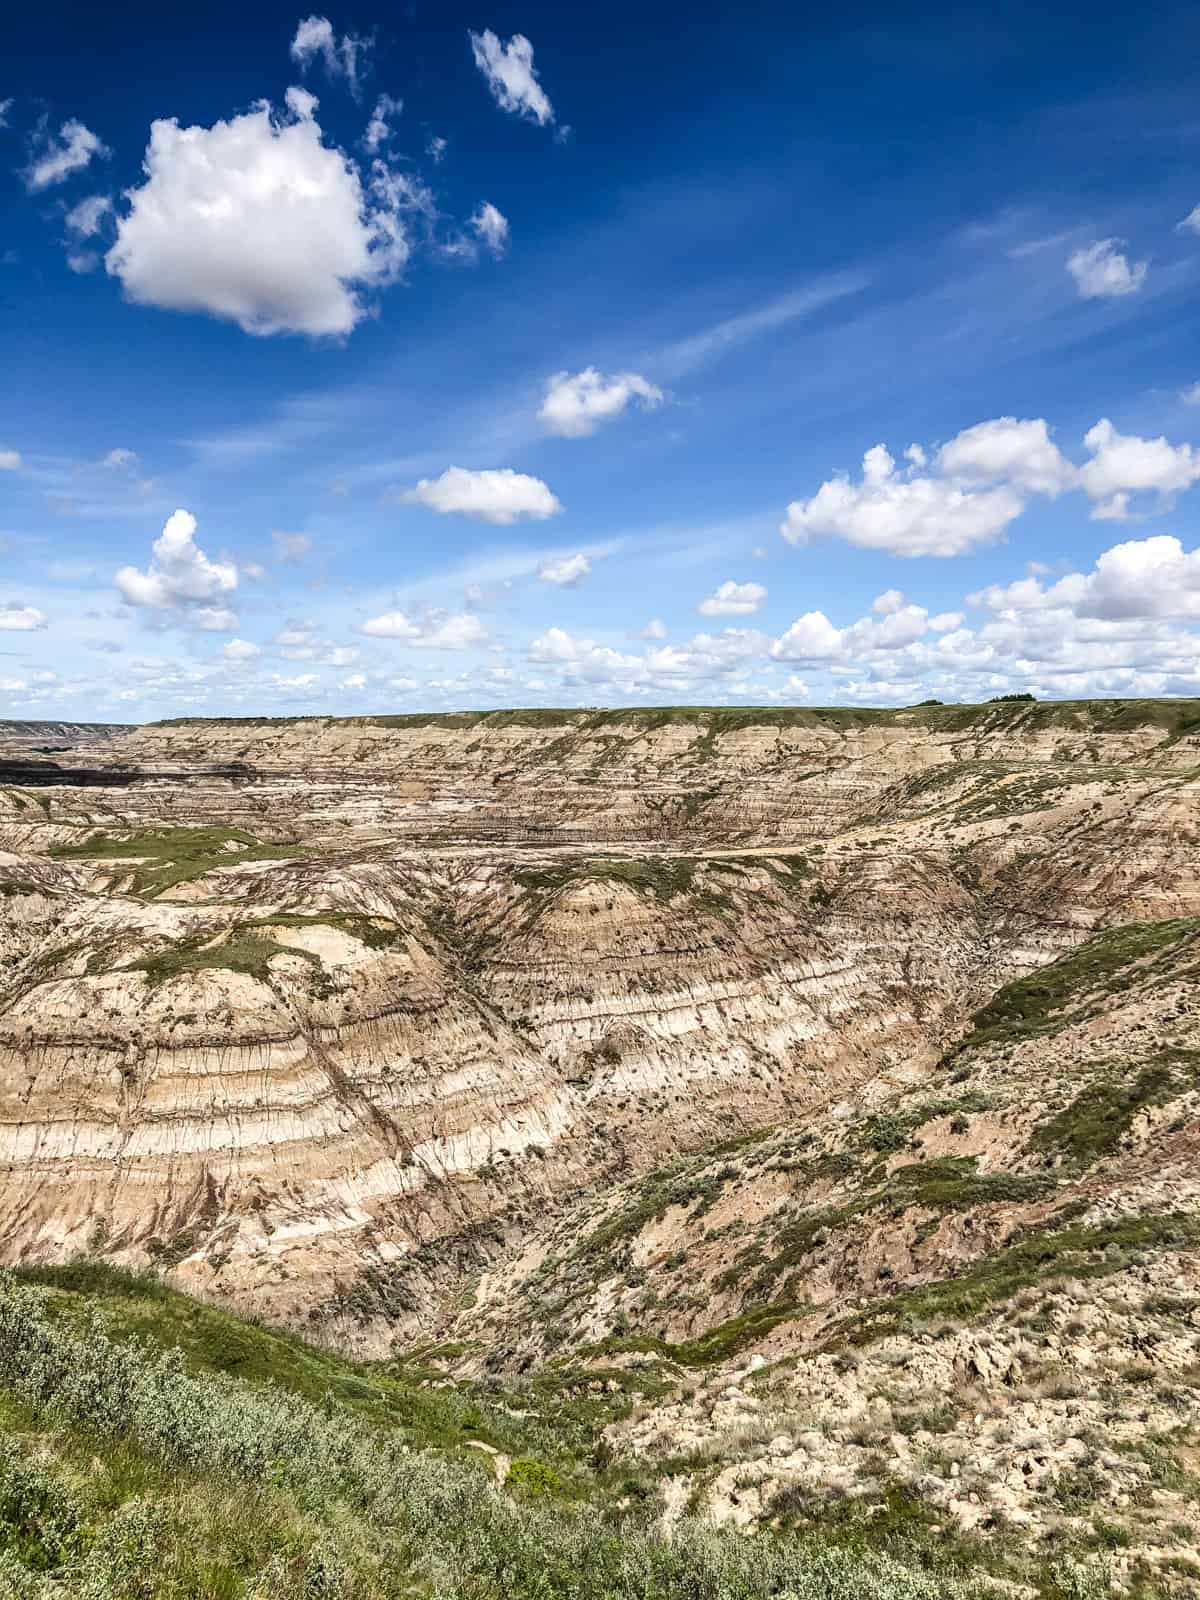 a view down into the valley of hoodoos (on the Dinosaur Trail) set against a blue sky with fluffy white clouds